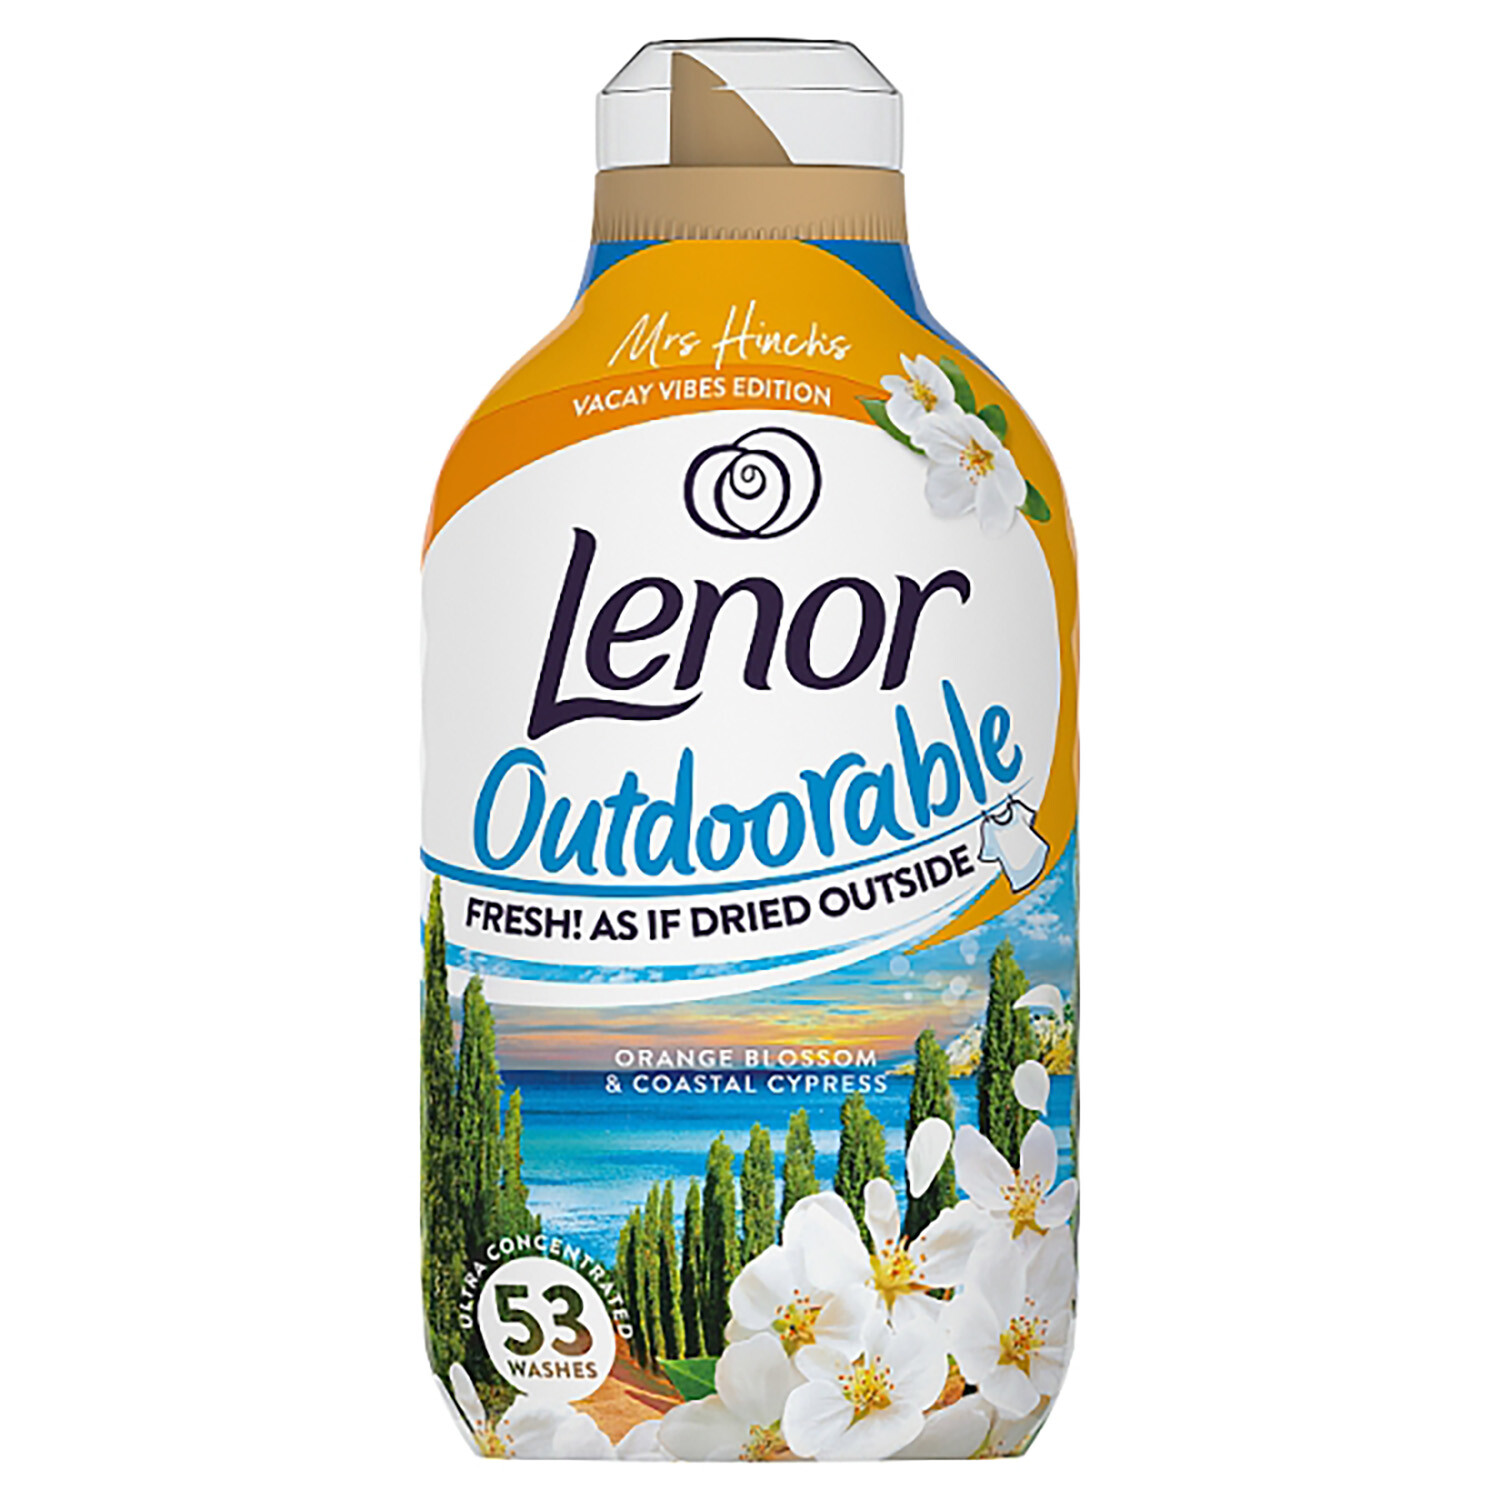 Lenor Outdoorable Fabric Conditioner - 53 / Orange Blossom and Coastal Cypress Image